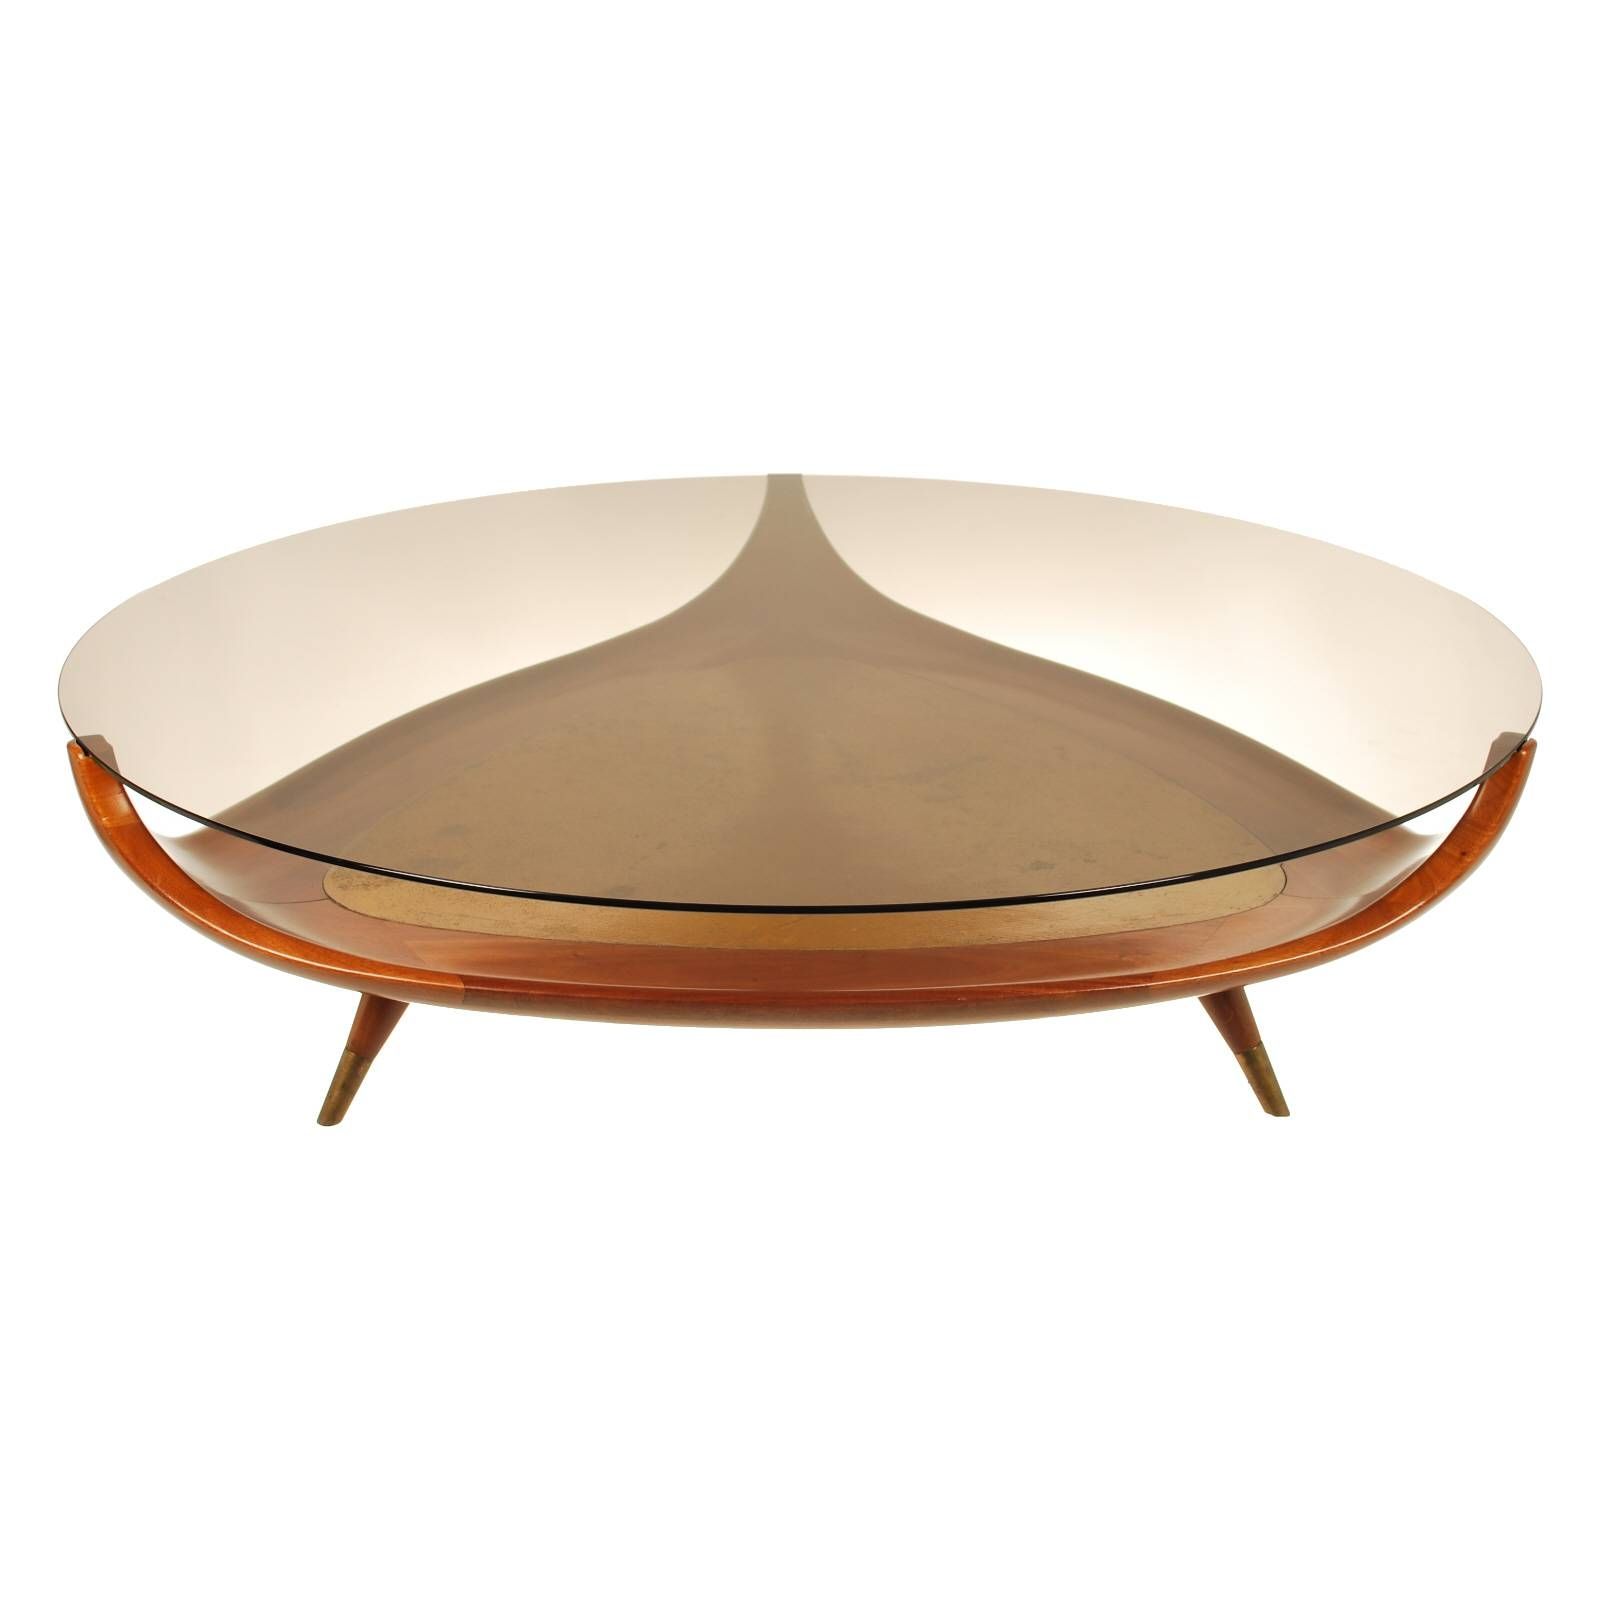 Round Coffee Table: Top Unique Round Wood And Glass Coffee Table With Regard To Contemporary Round Coffee Tables (View 12 of 15)